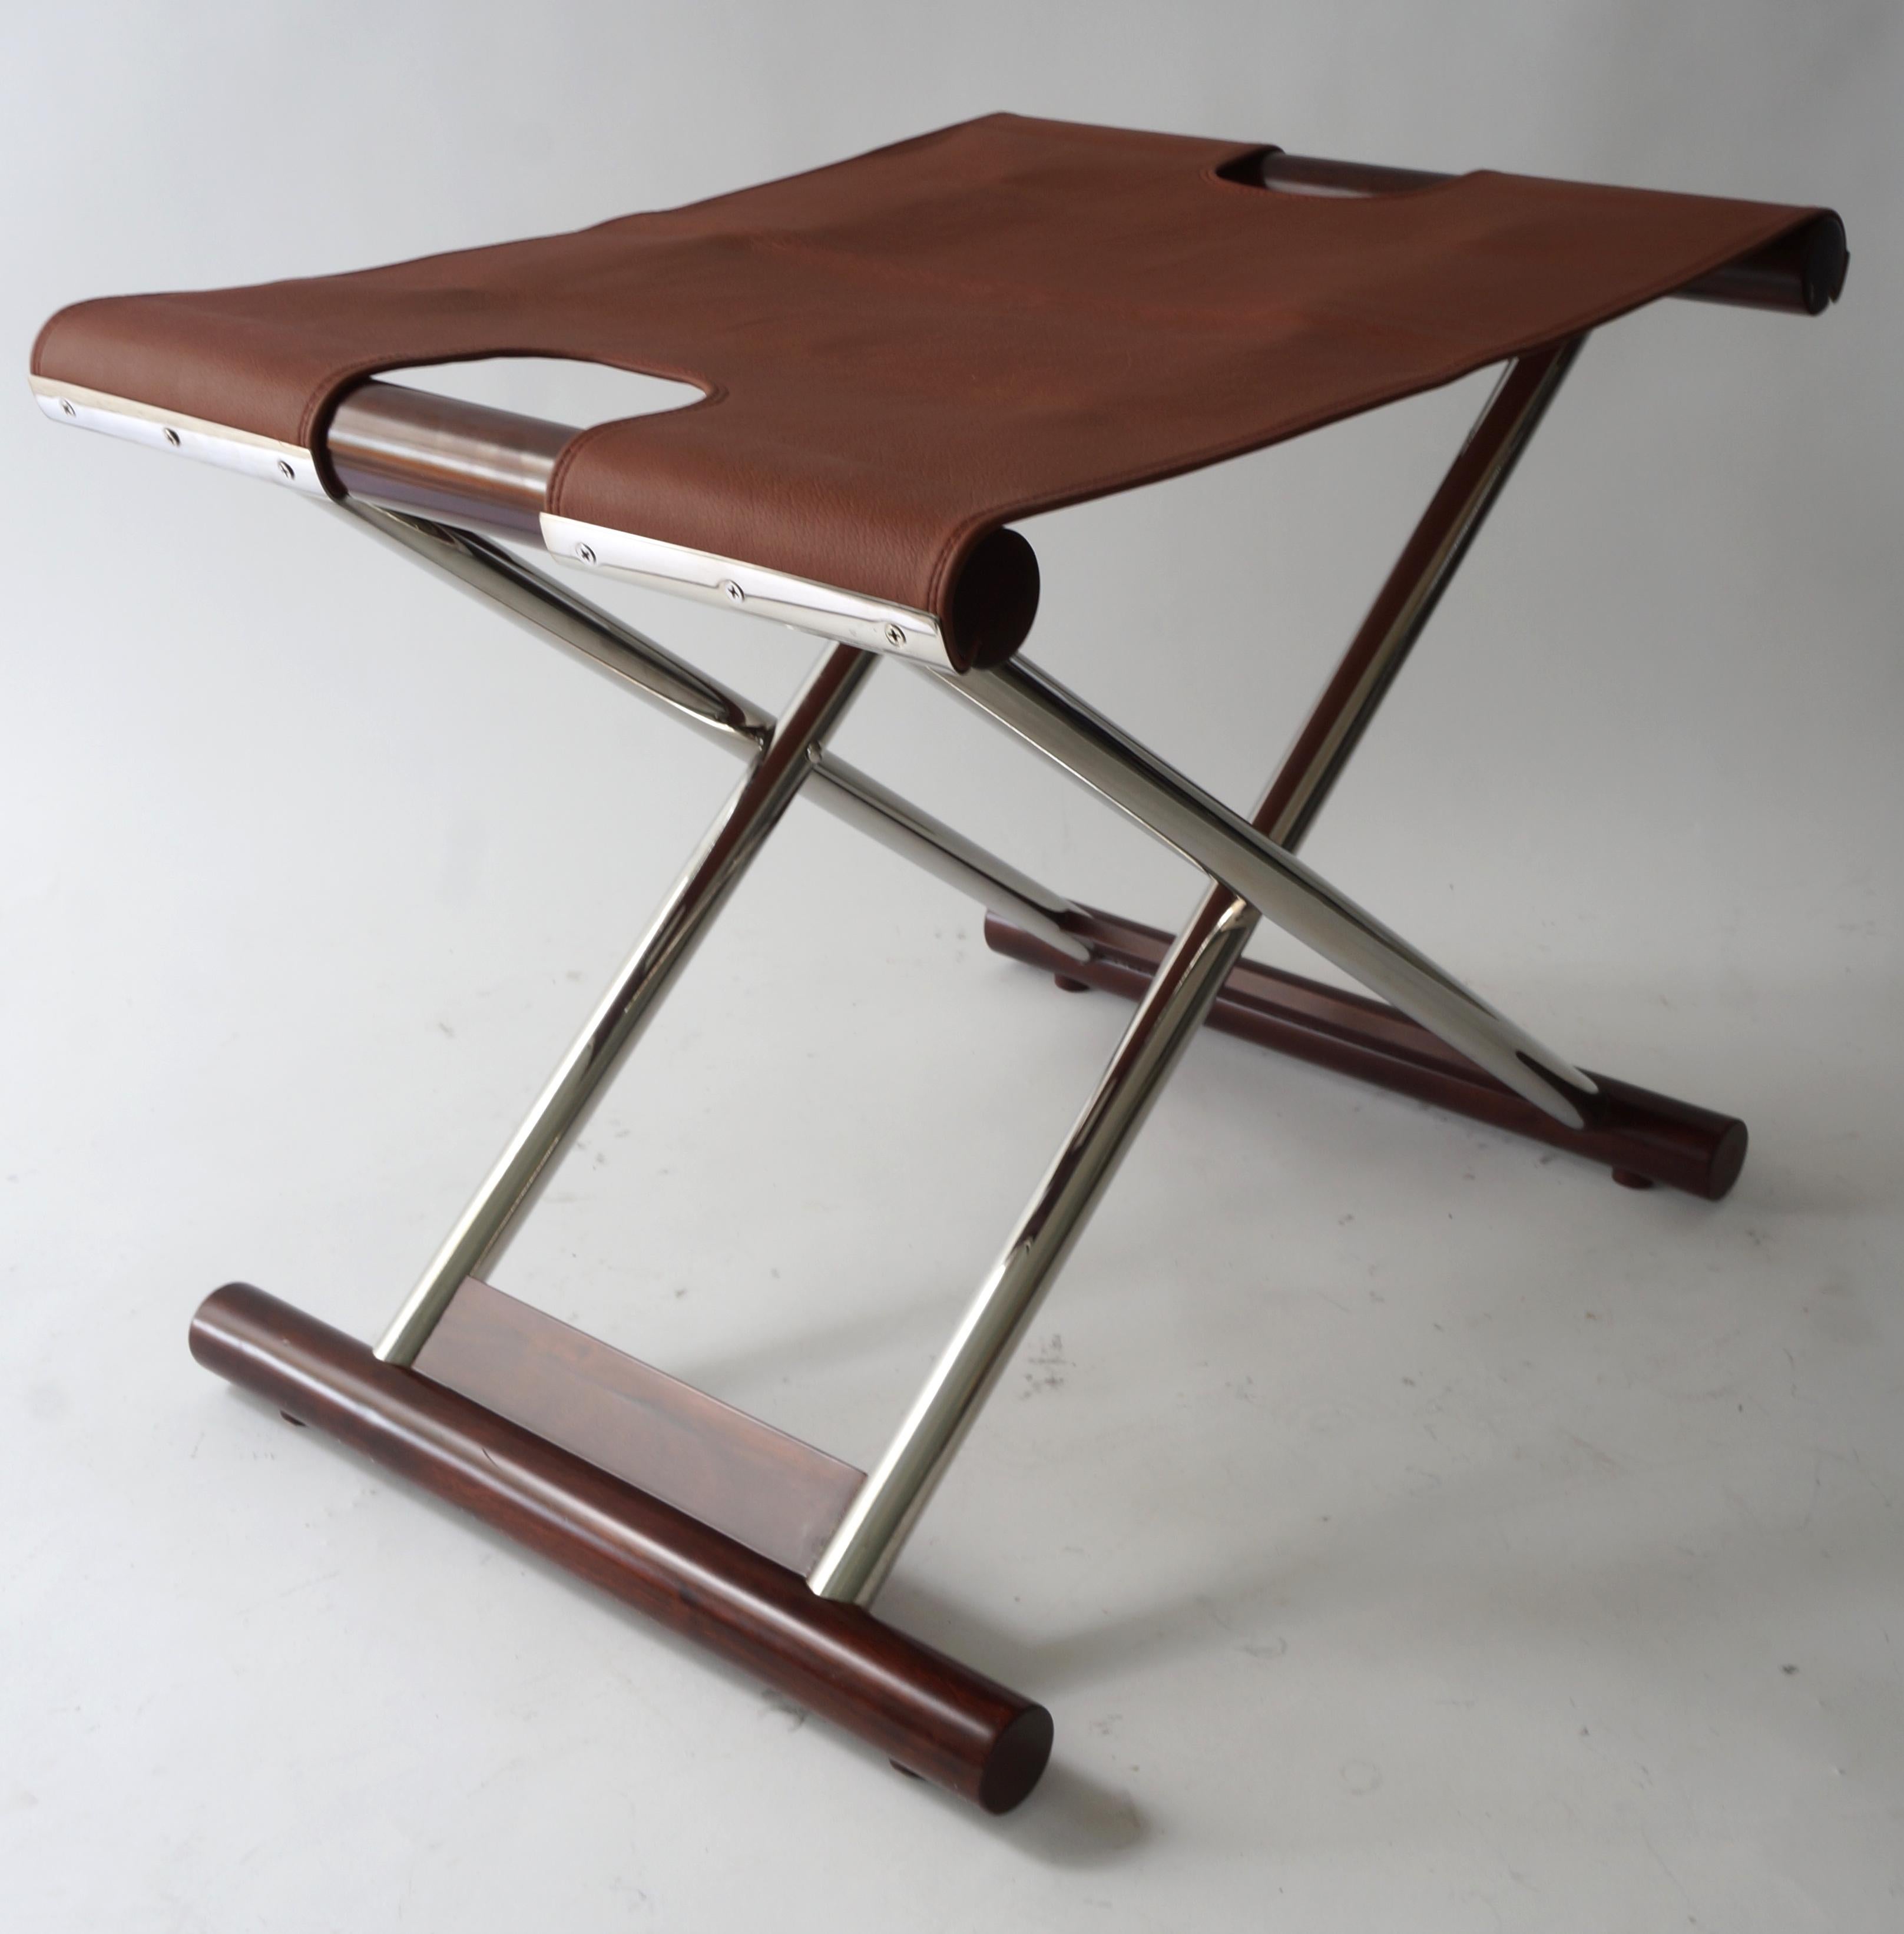 Vintage folding X-Sling stool in leather polished stainless steel and mahogany from a Palm Beach estate.

size when opened is 23 wide, 17.5 deep, and 19